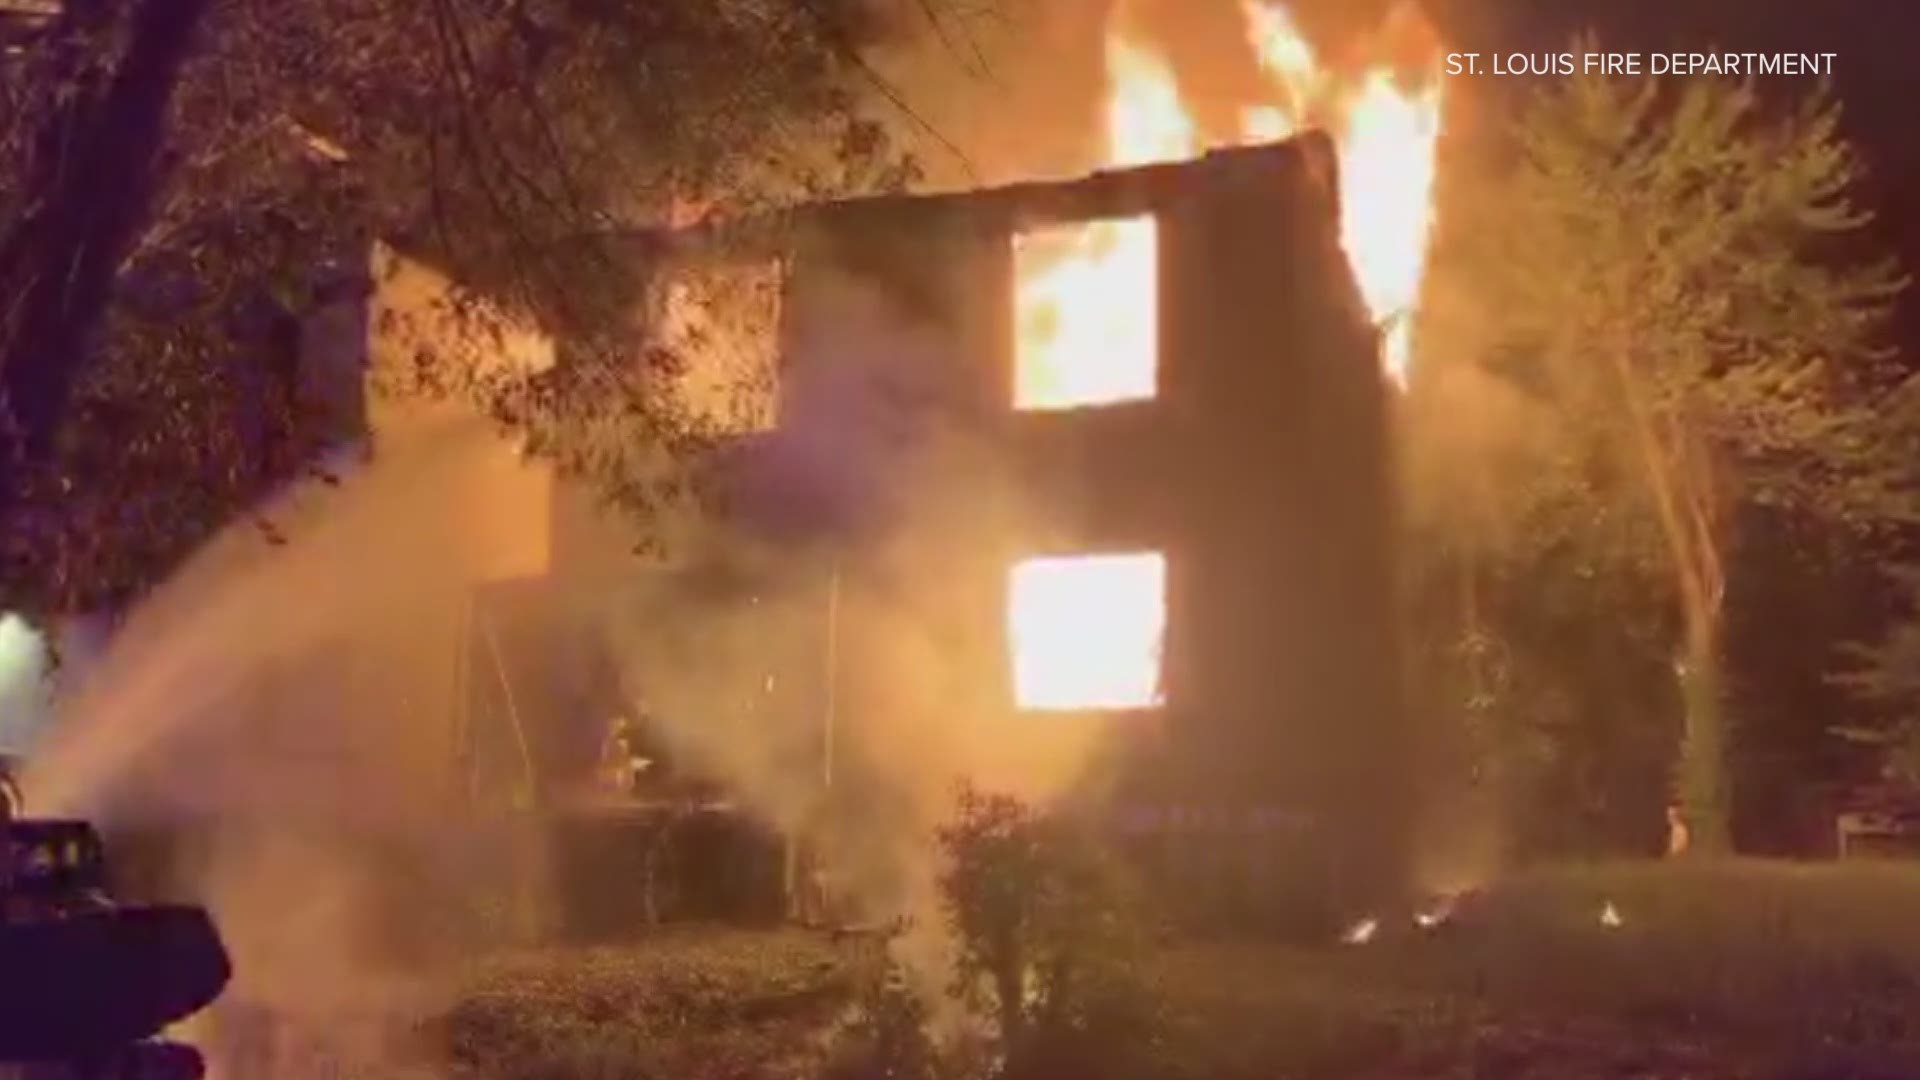 The fire department shared video showing large flames shooting out of the windows from the first floor through the roof.